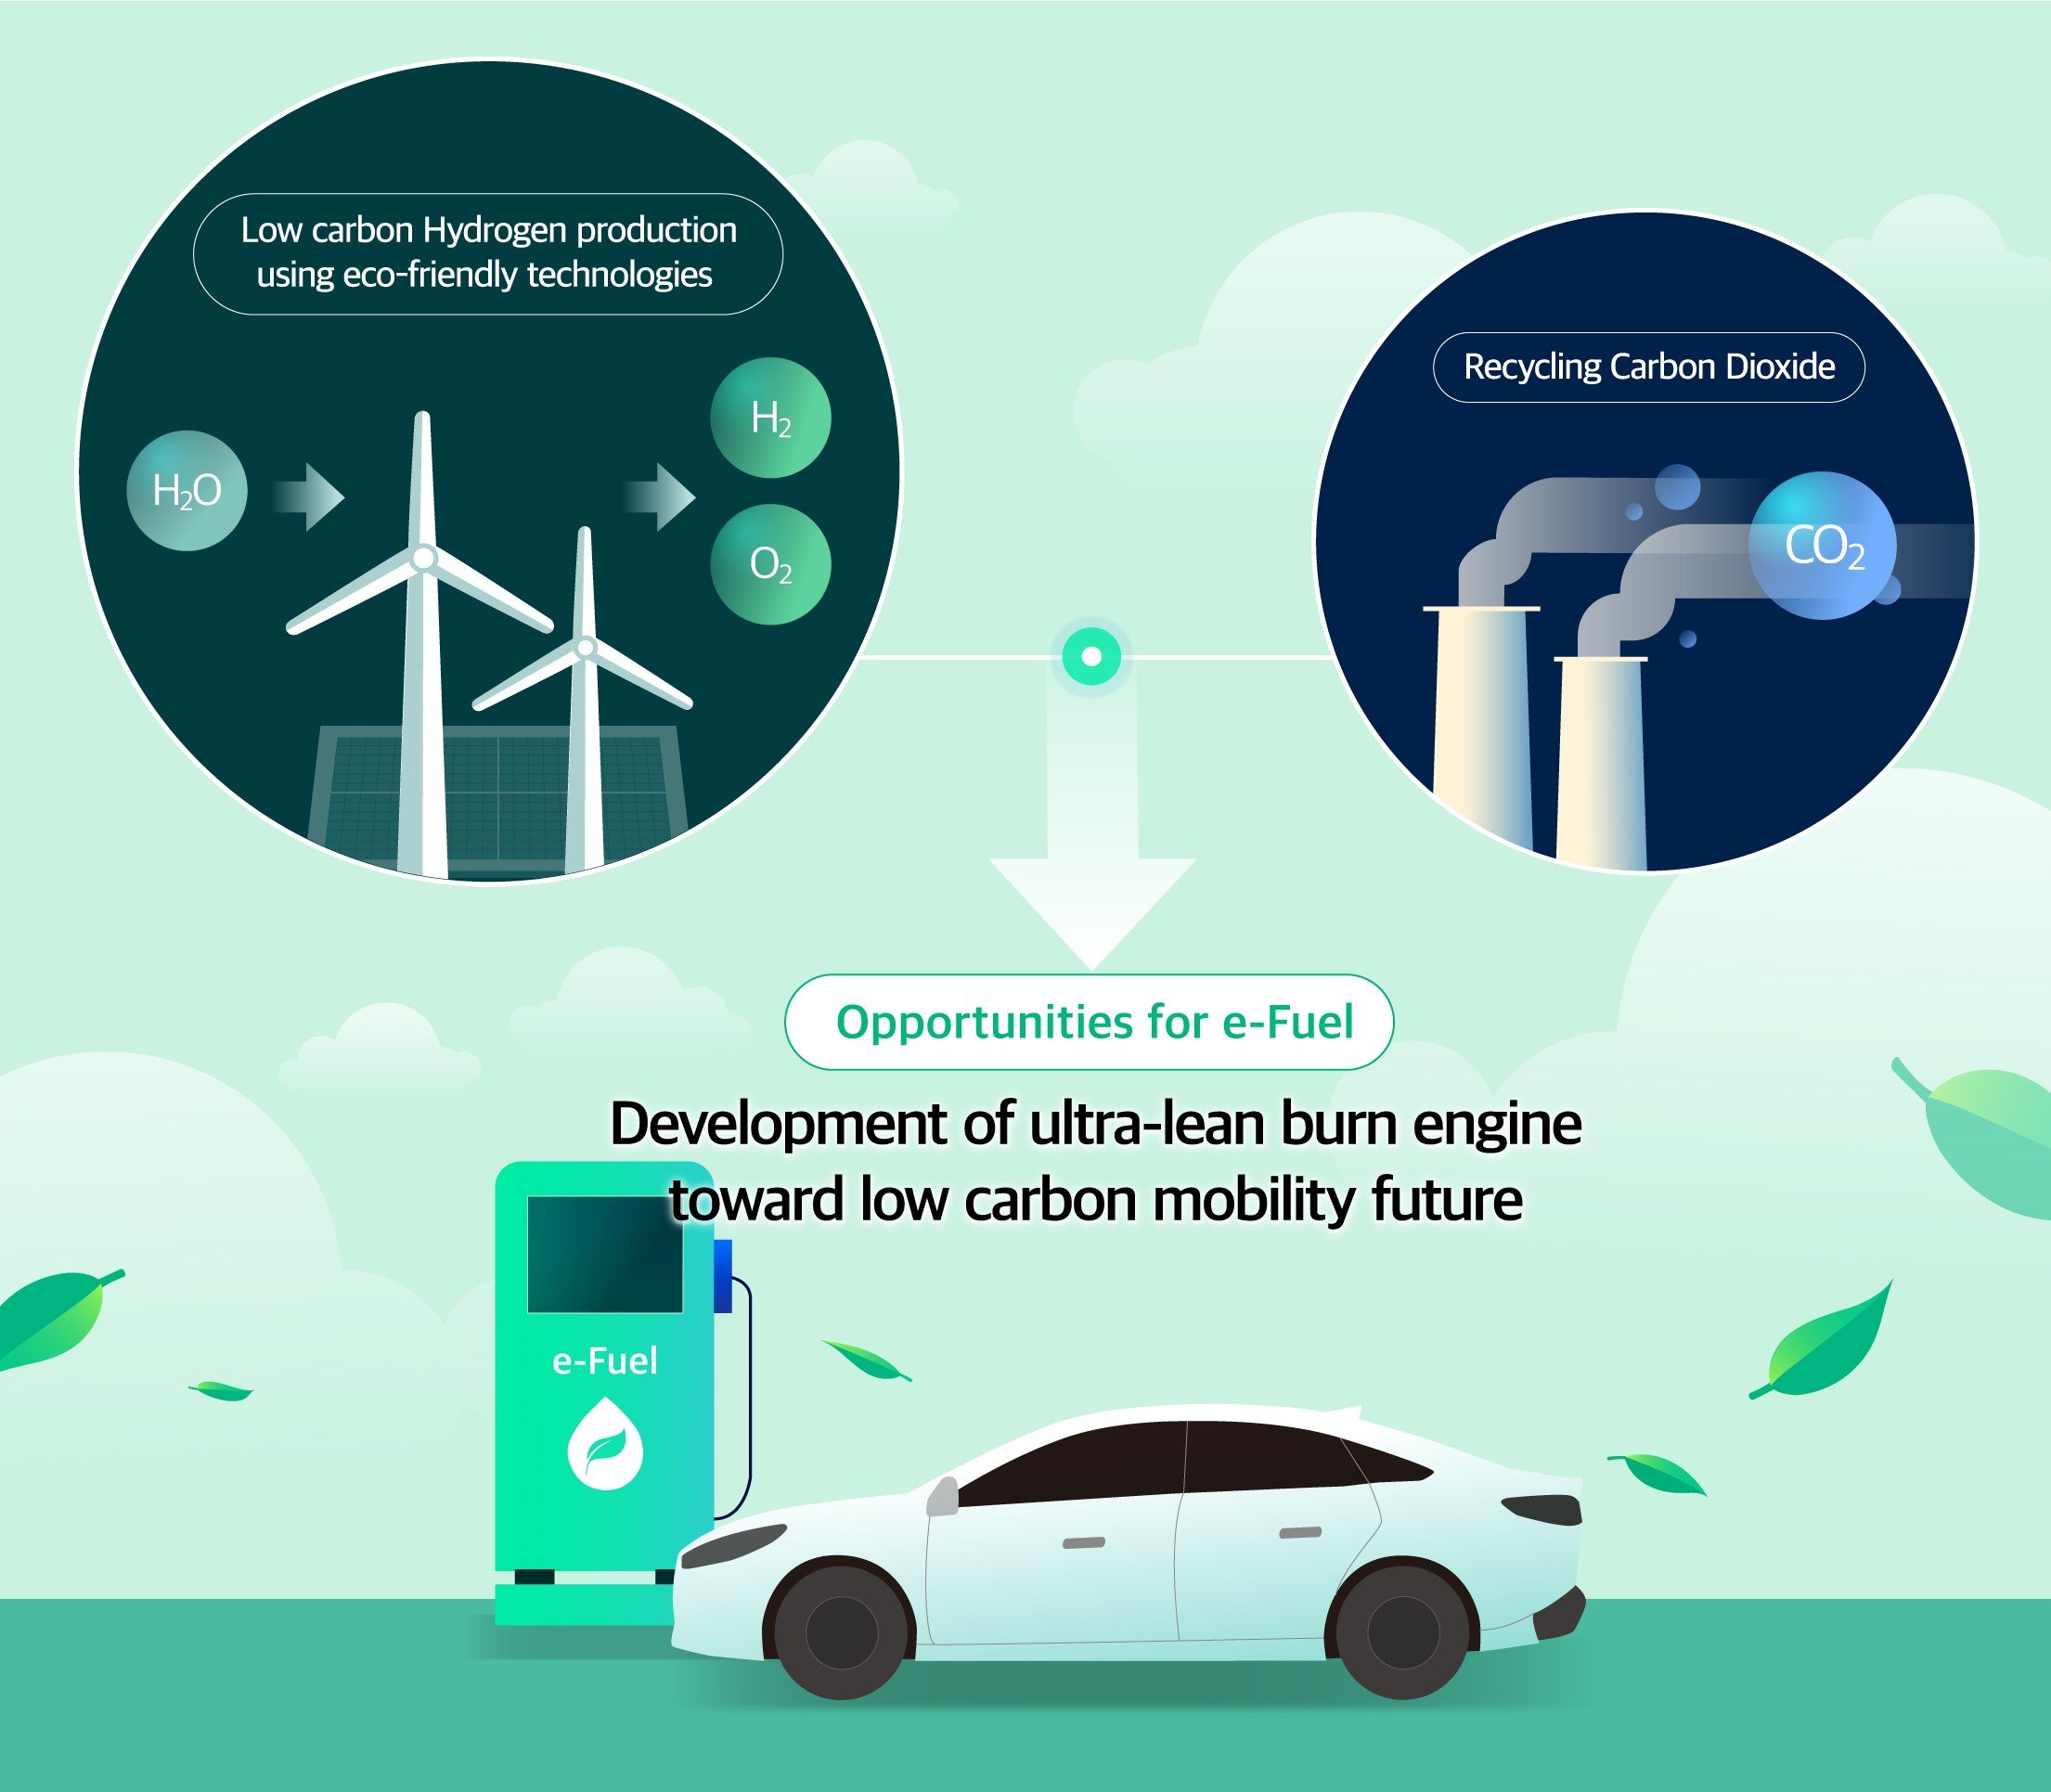 Hyundai, KAUST and Aramco to collaborate on new E-fuel development